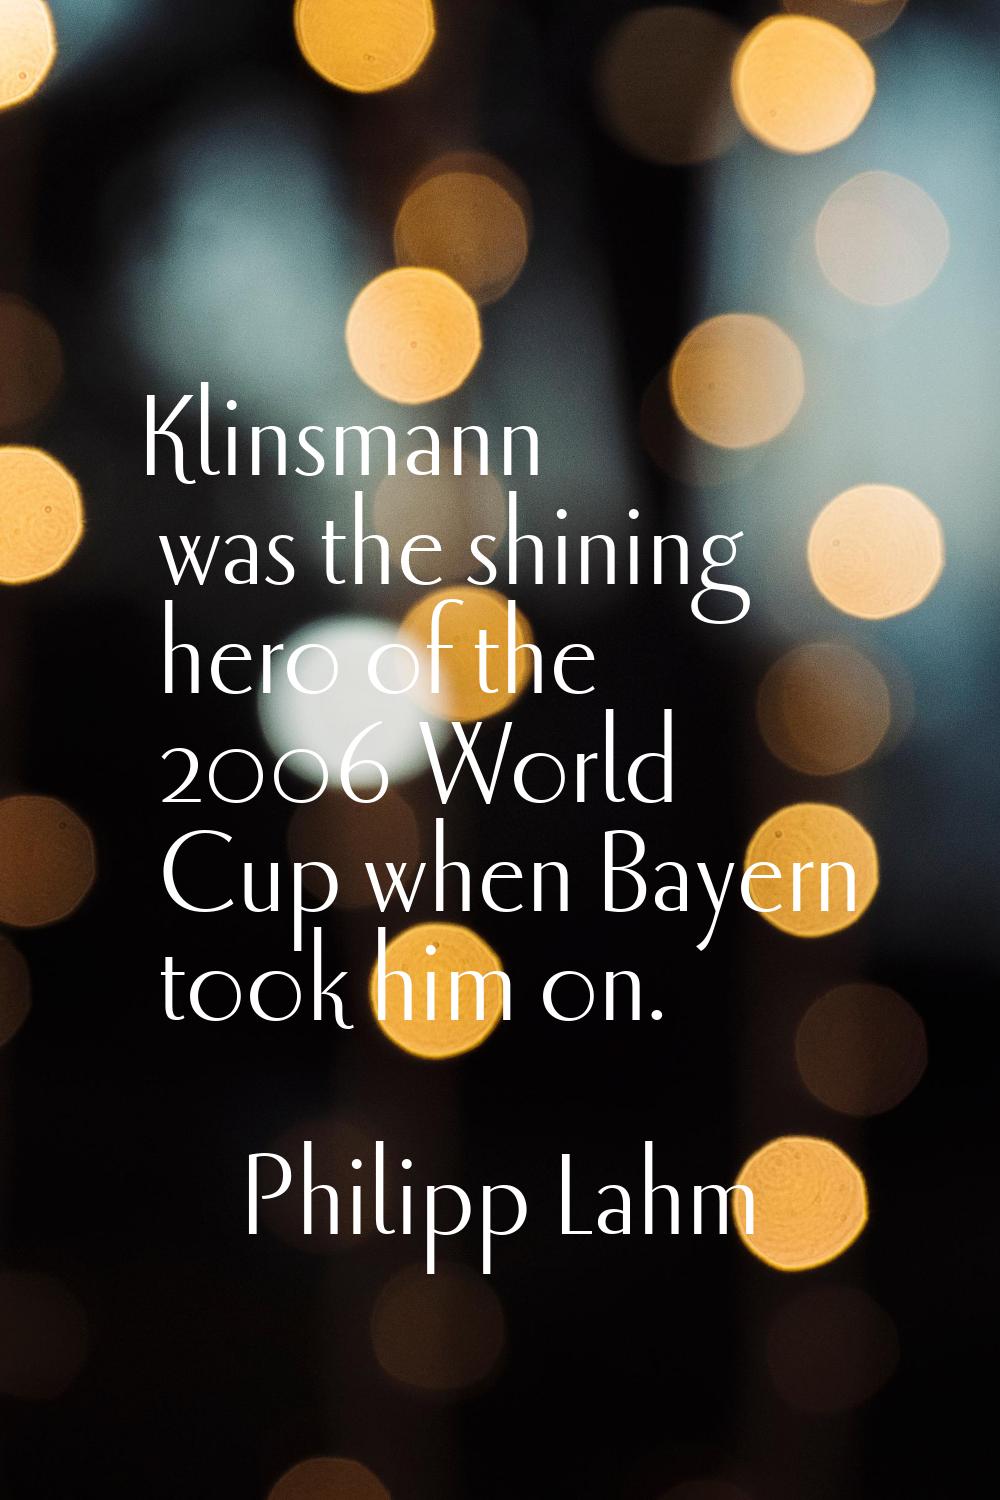 Klinsmann was the shining hero of the 2006 World Cup when Bayern took him on.